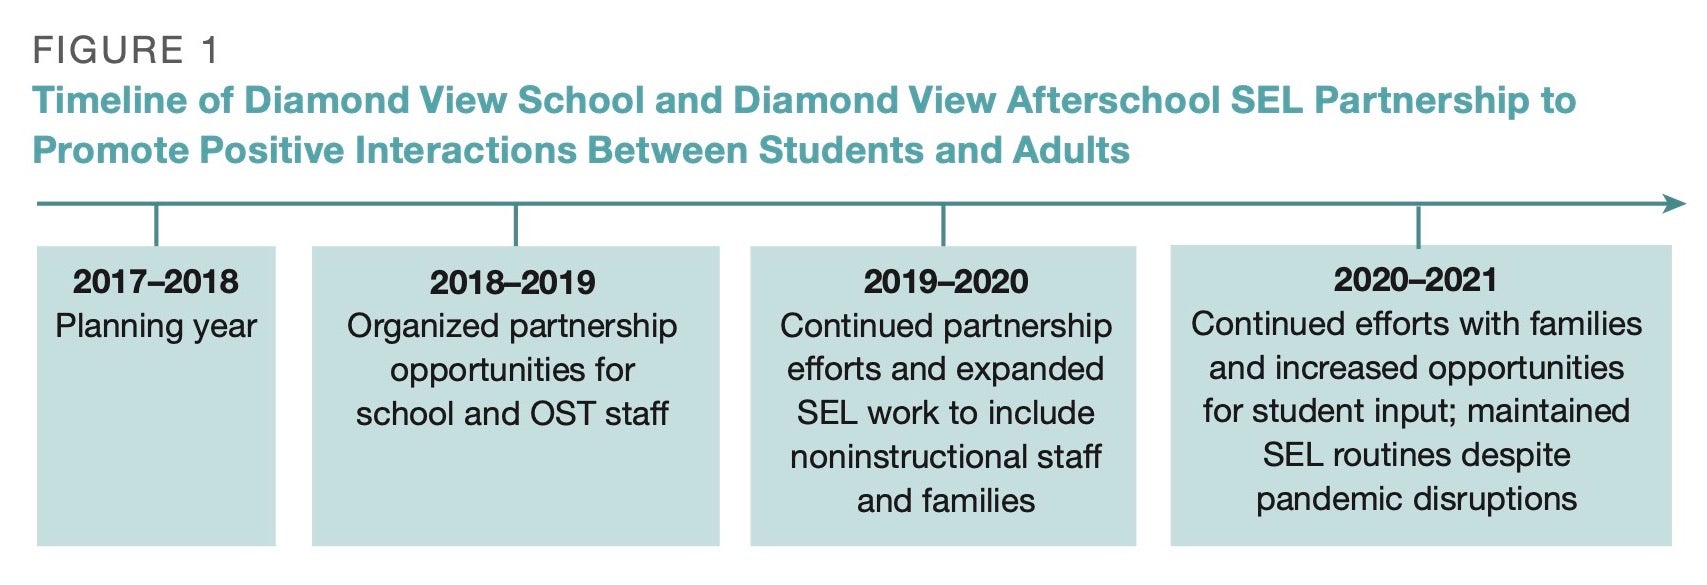 Timeline of Diamond View School and Diamond View Afterschool SEL Partnership to Promote Positive Interactions Between Students and Adults